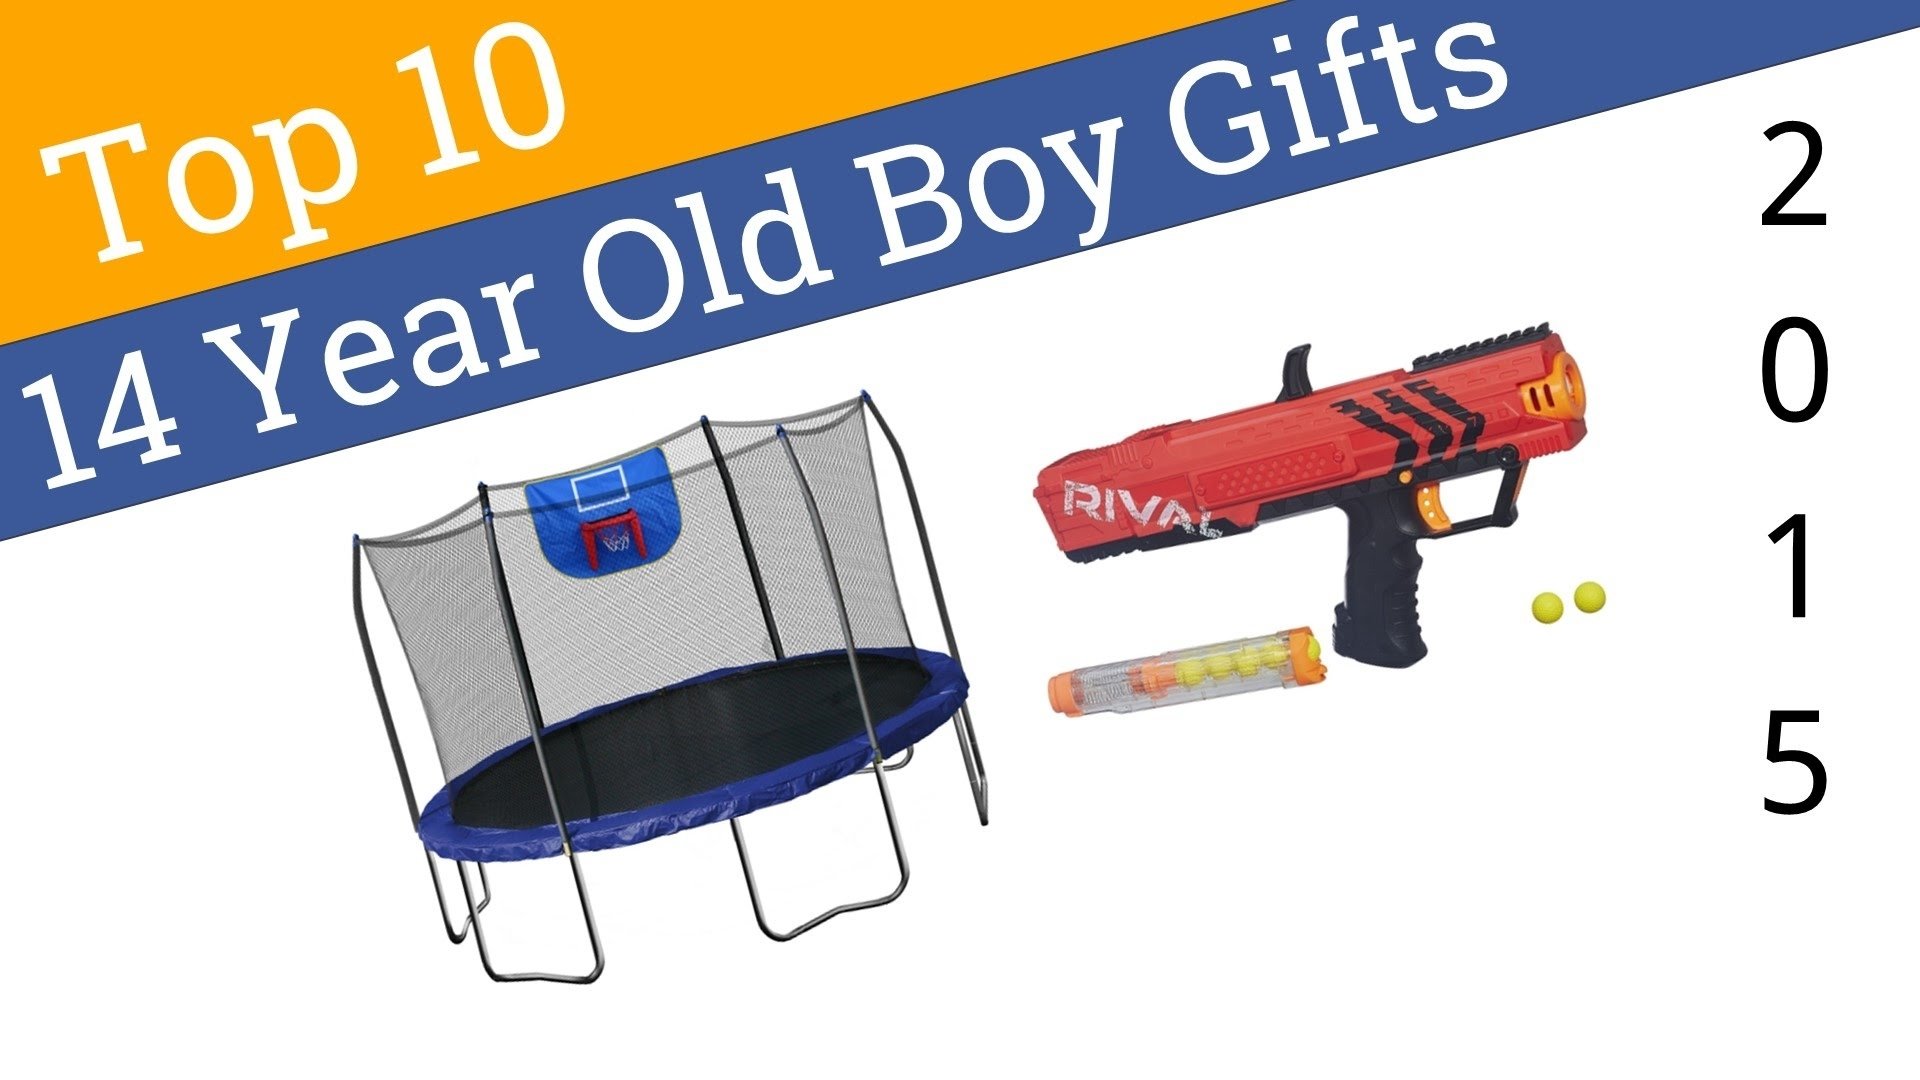 10 Unique Gift Ideas For 14 Year Old Boys 10 best 14 year old boy gifts 2015 youtube 10 2023